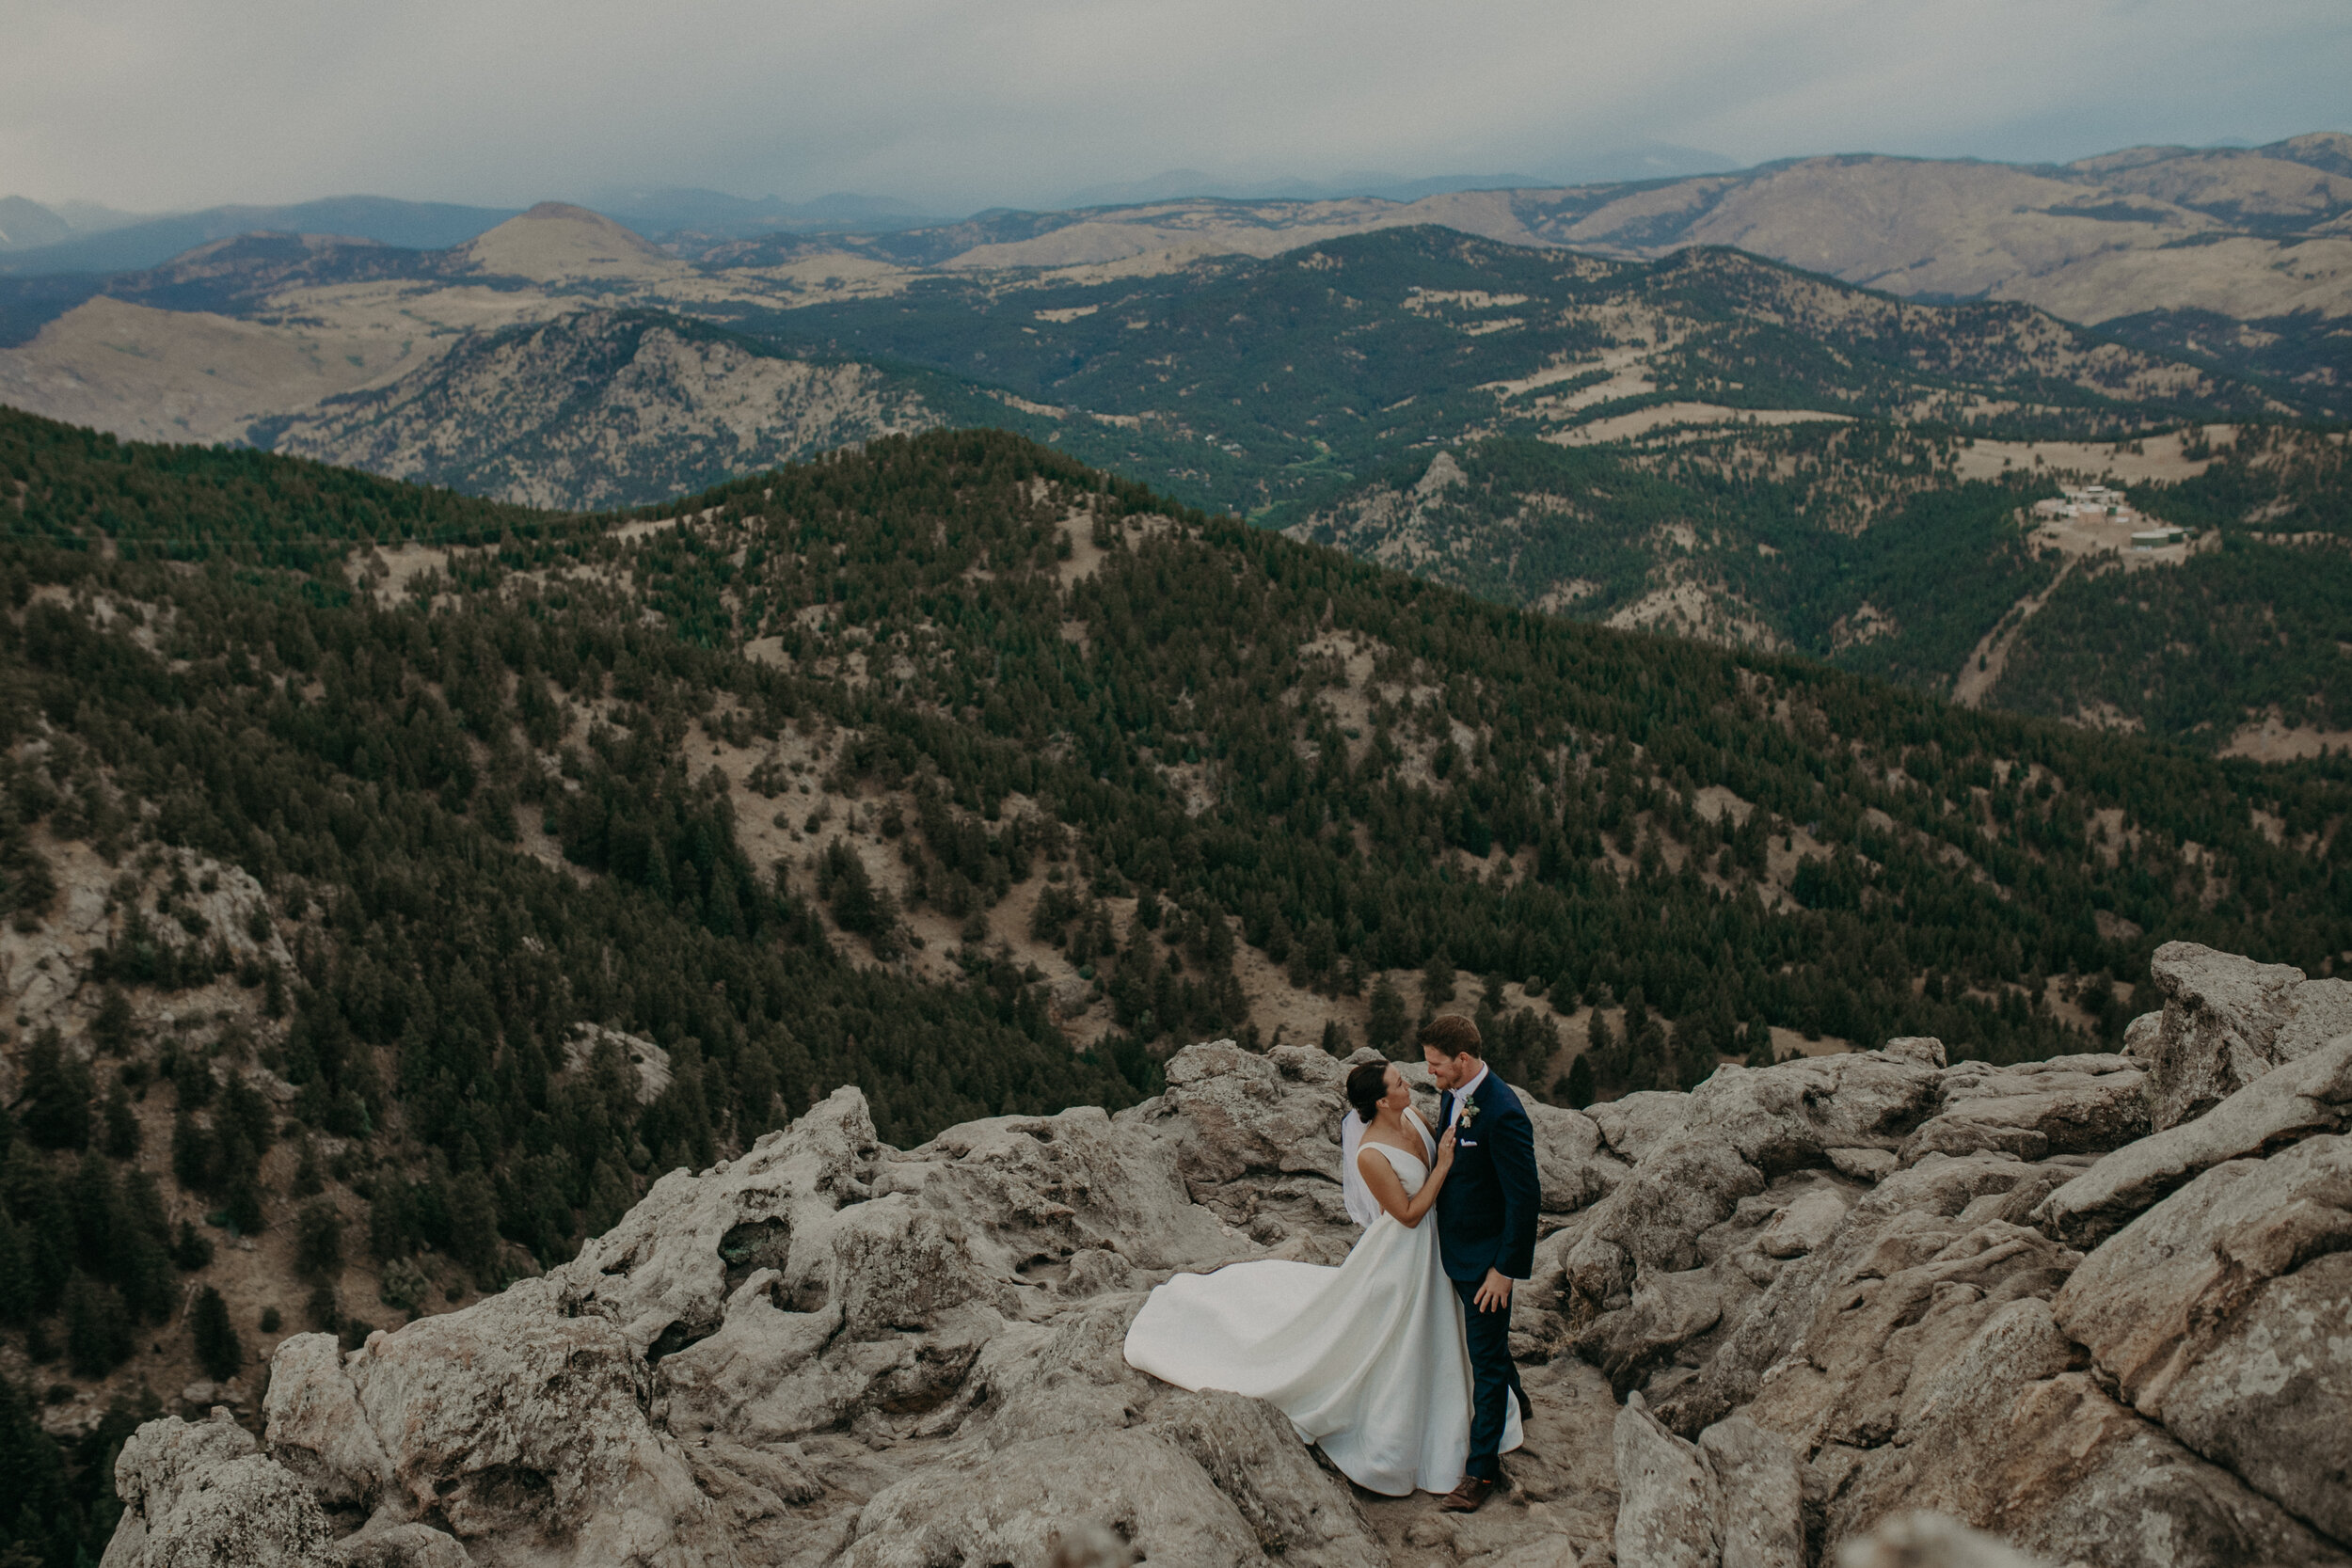  a couple elopes at Lost Gulch Lookout in Boulder CO with Andrea Wagner Photography #bouldercoelopement #elopetocolorado #elopementphotographer #coloradoweddingphotographer #coloradoelopementphotographer #sunriseampitheatre #sunriseampitheatrewedding